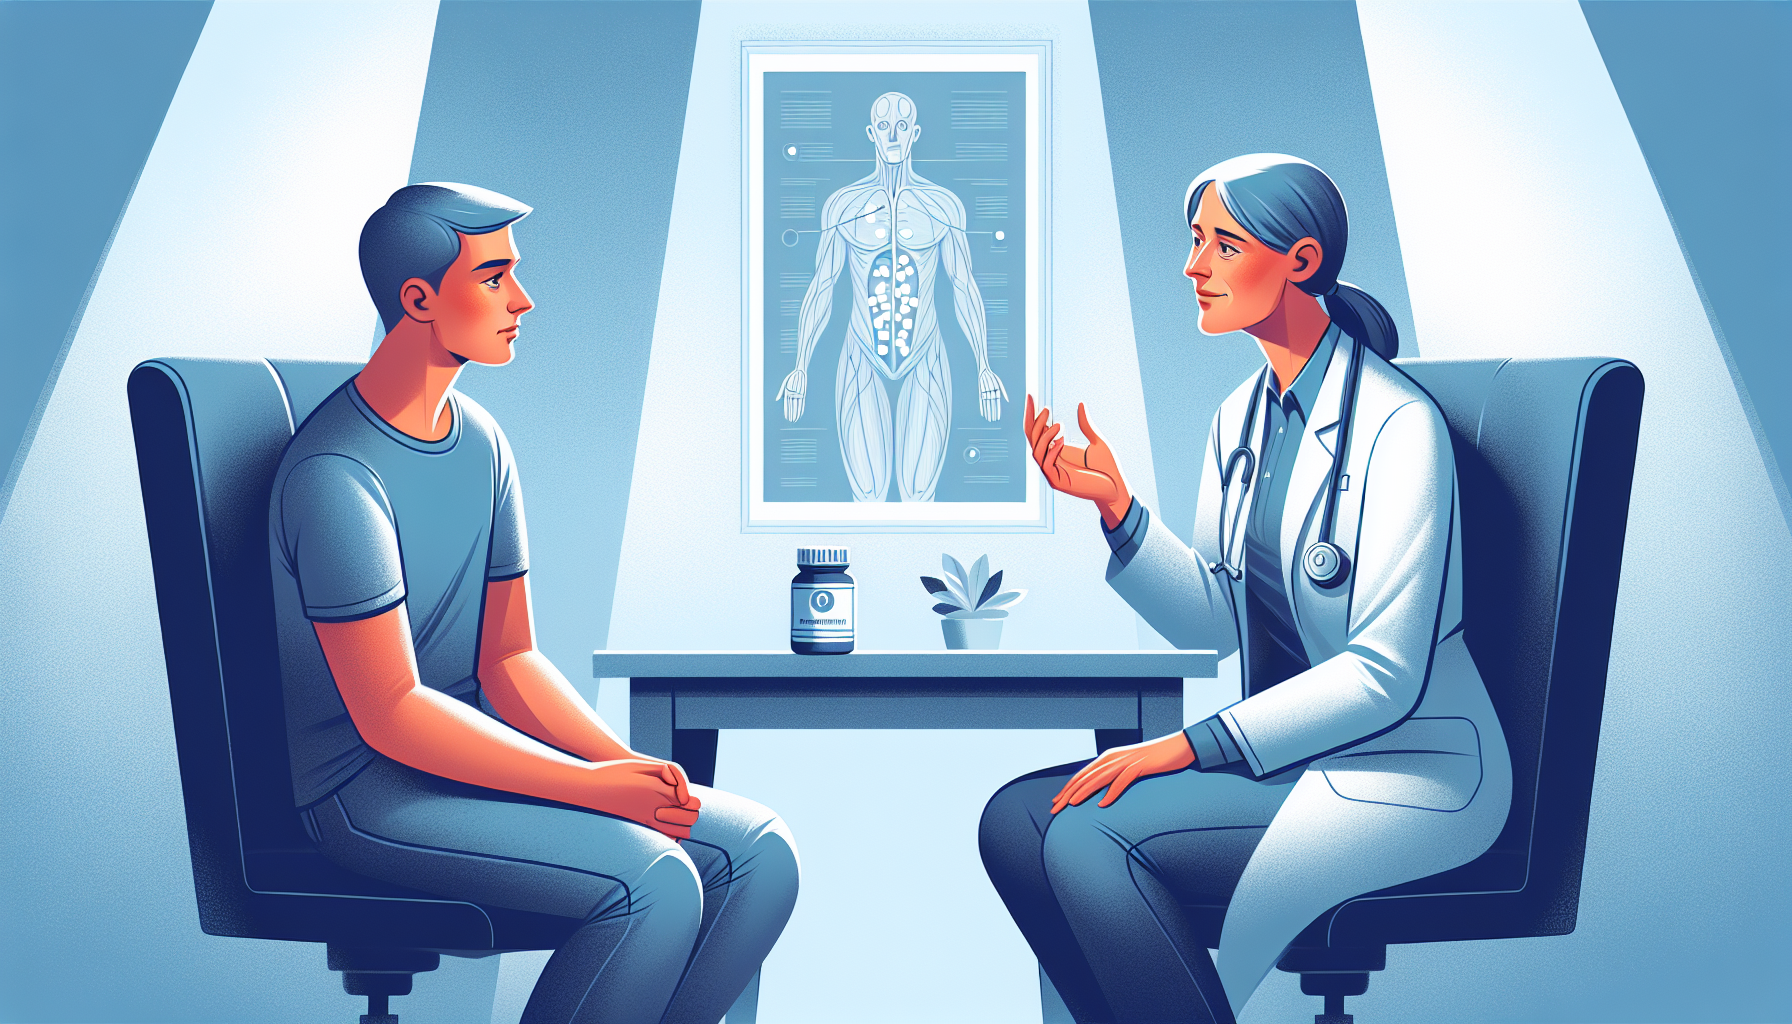 Illustration of a person consulting with a healthcare provider